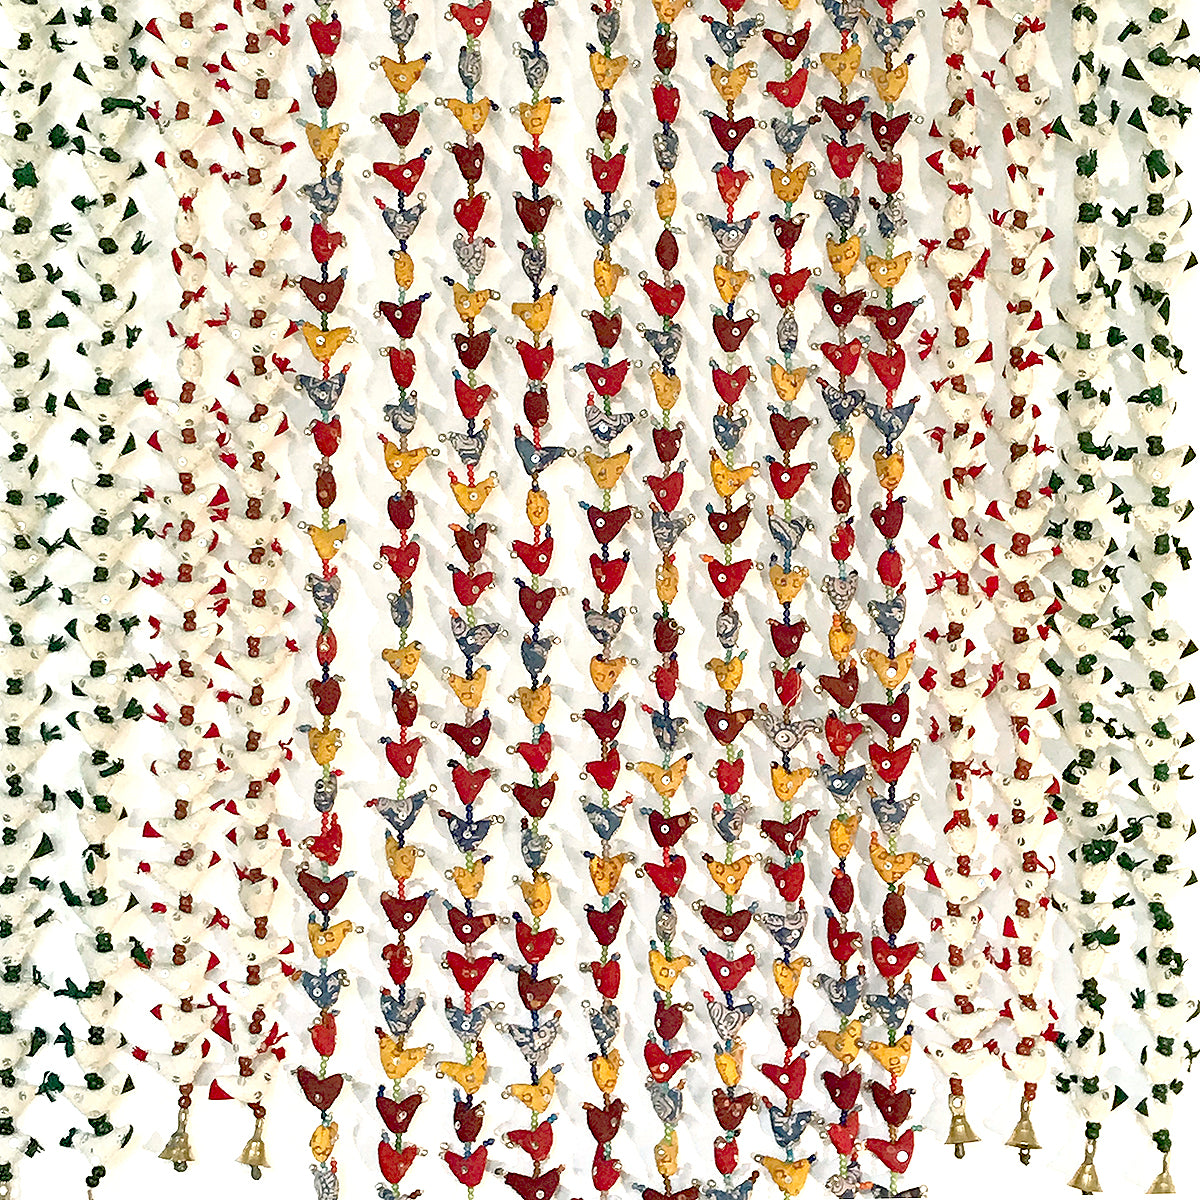 Tilonia® Bell Totas - Flock of Tiny Holiday Doves - Green or Red